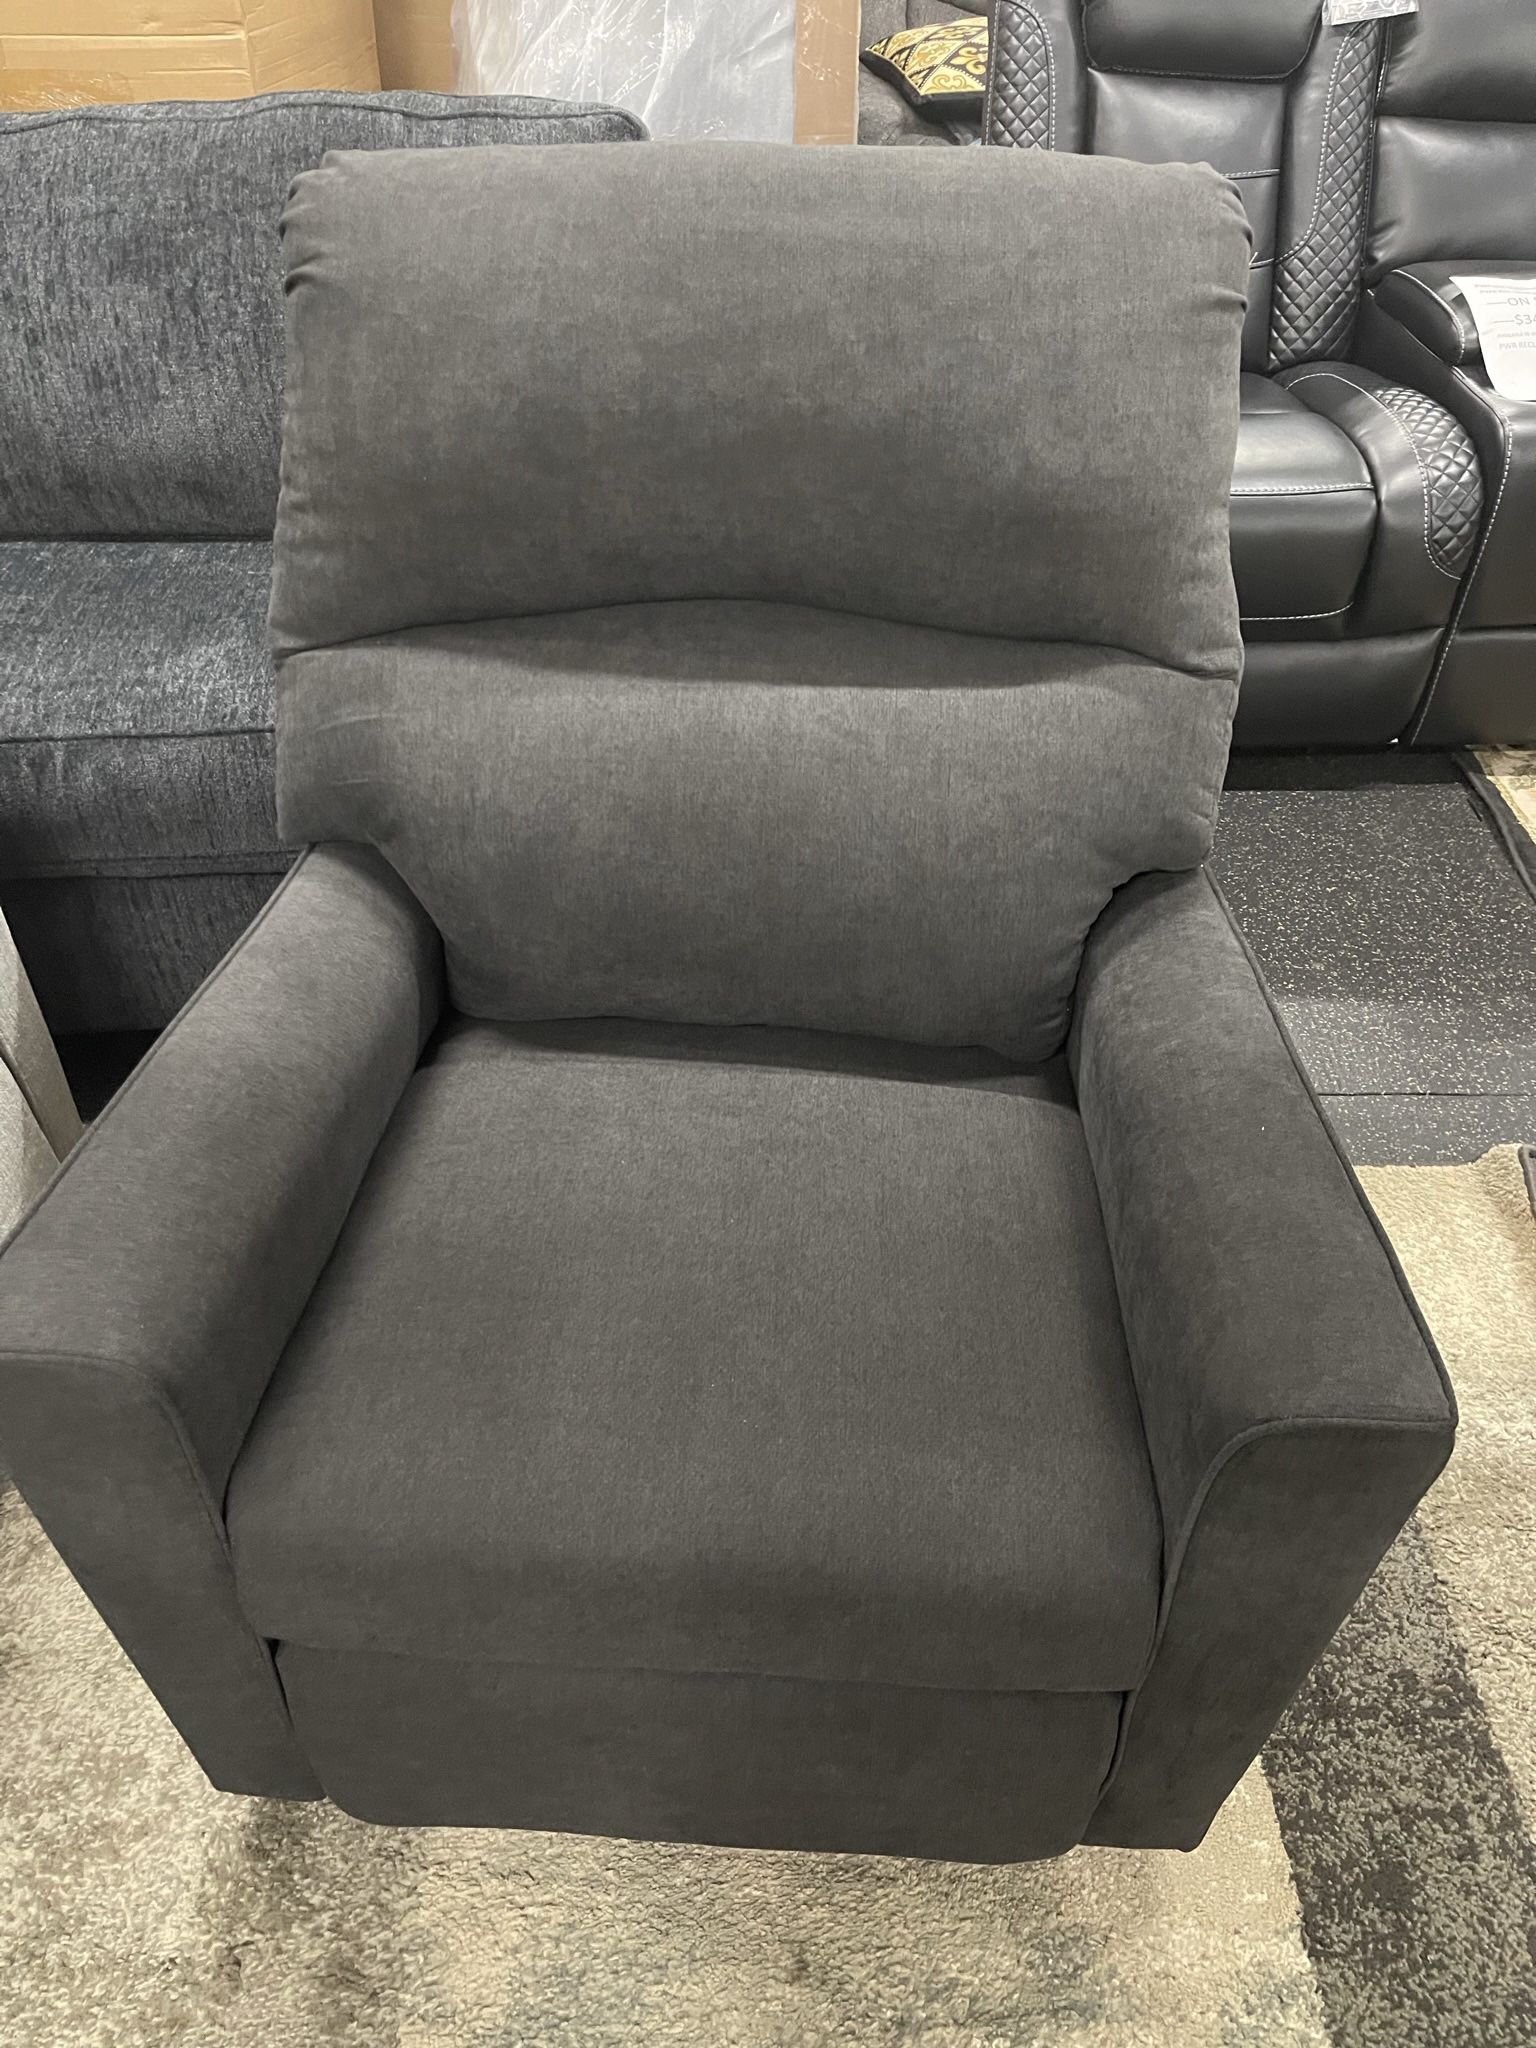 Recliner On Sale